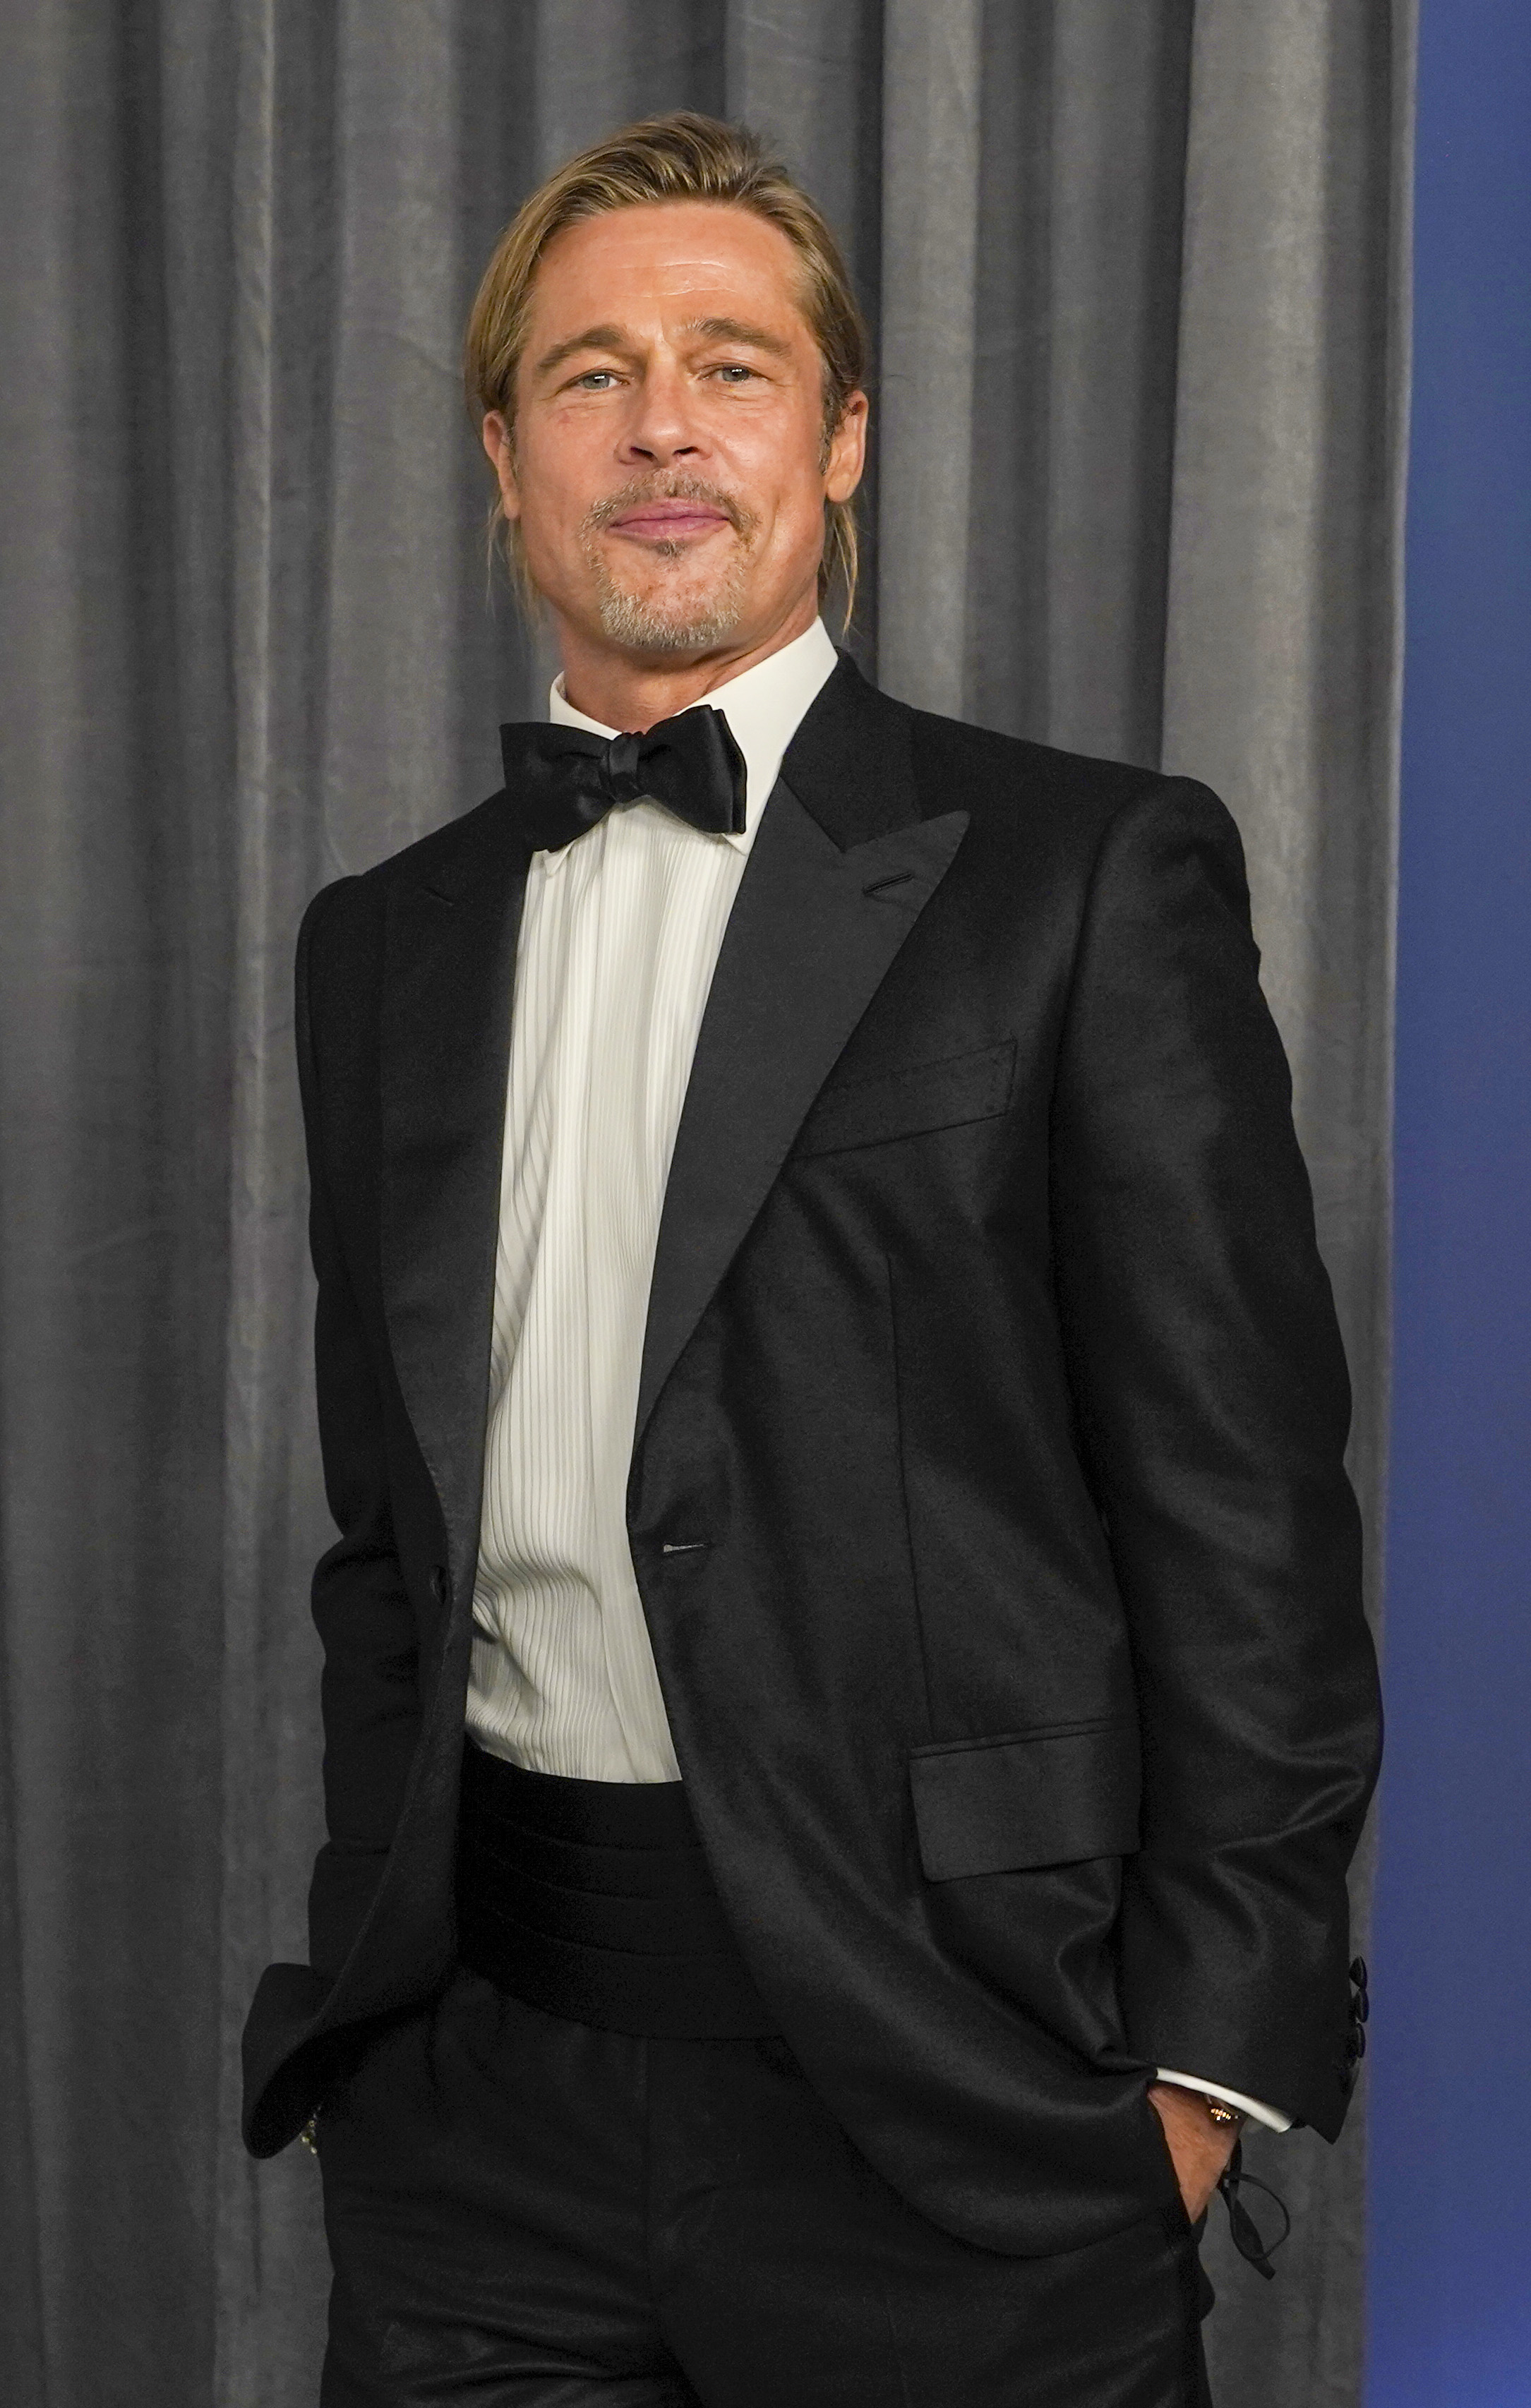 Brad Pitt poses in the press room at the Oscars, at Union Station in Los Angeles on April 25, 2021. | Source: Getty Images